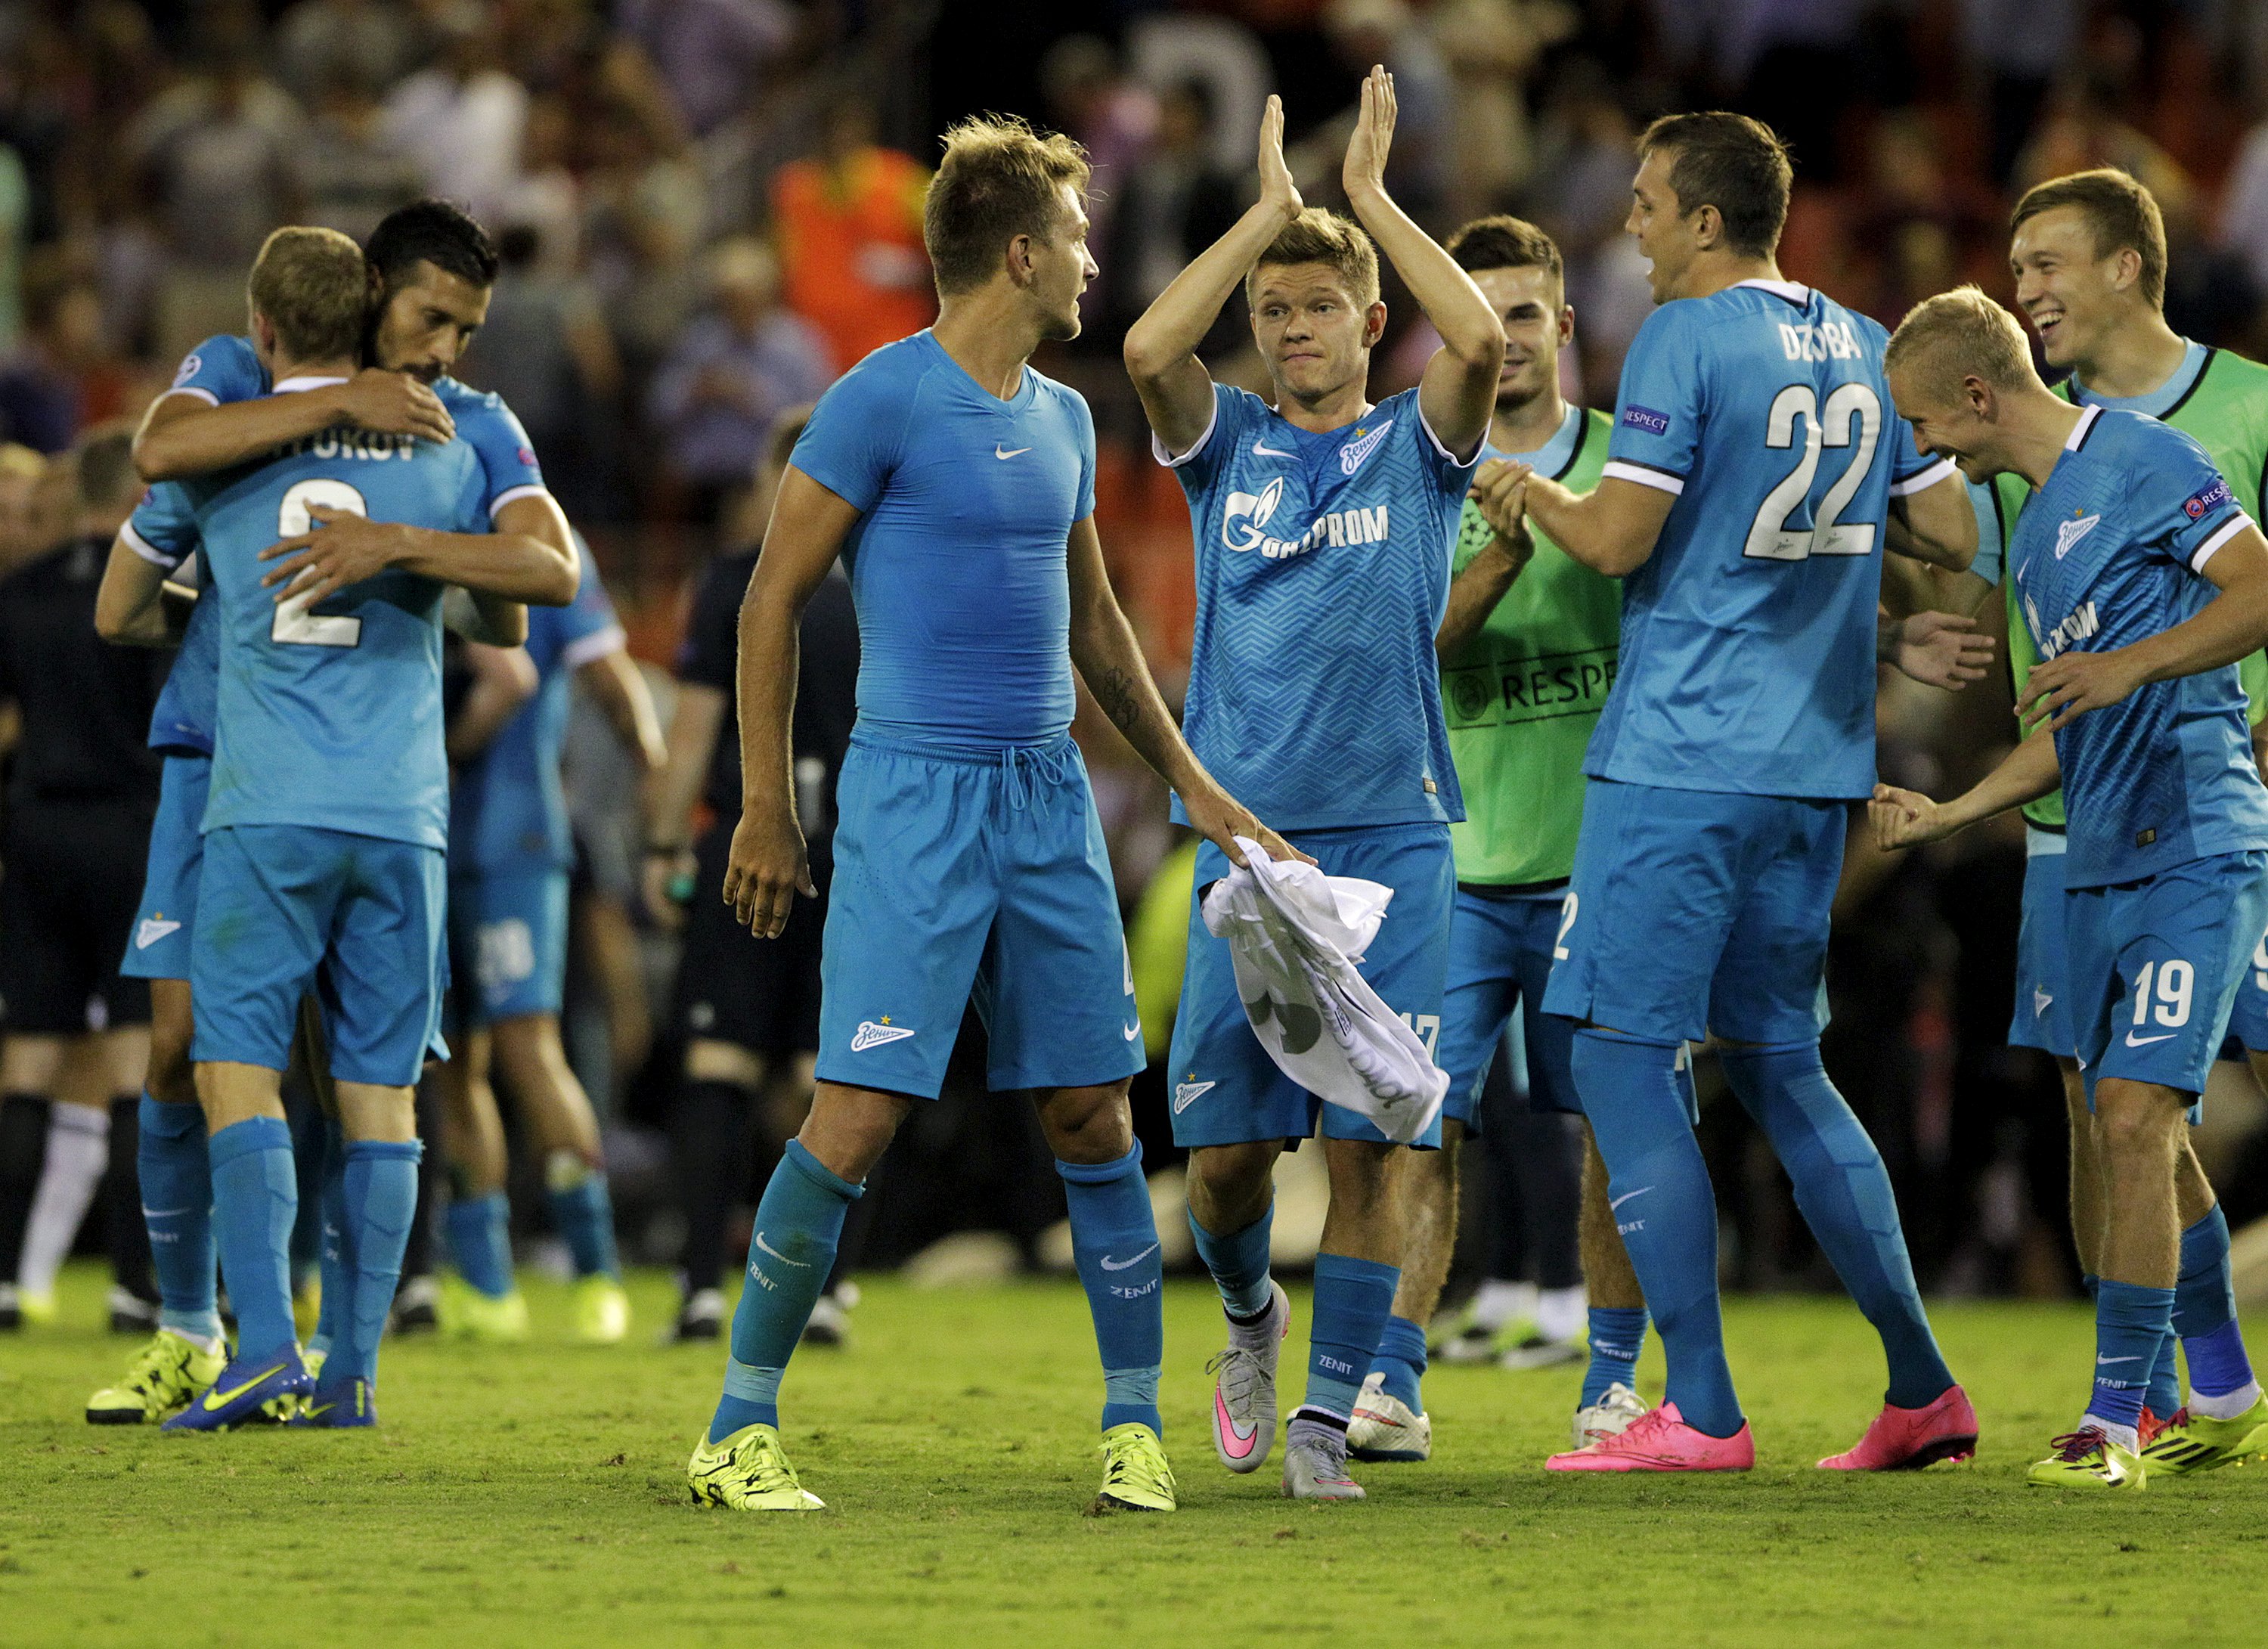 Zenit's players celebrate their victory over Valencia after their Champions league Group H soccer match at Mestalla stadium in Valencia, Spain, September 16, 2015. REUTERS/Heino Kalis